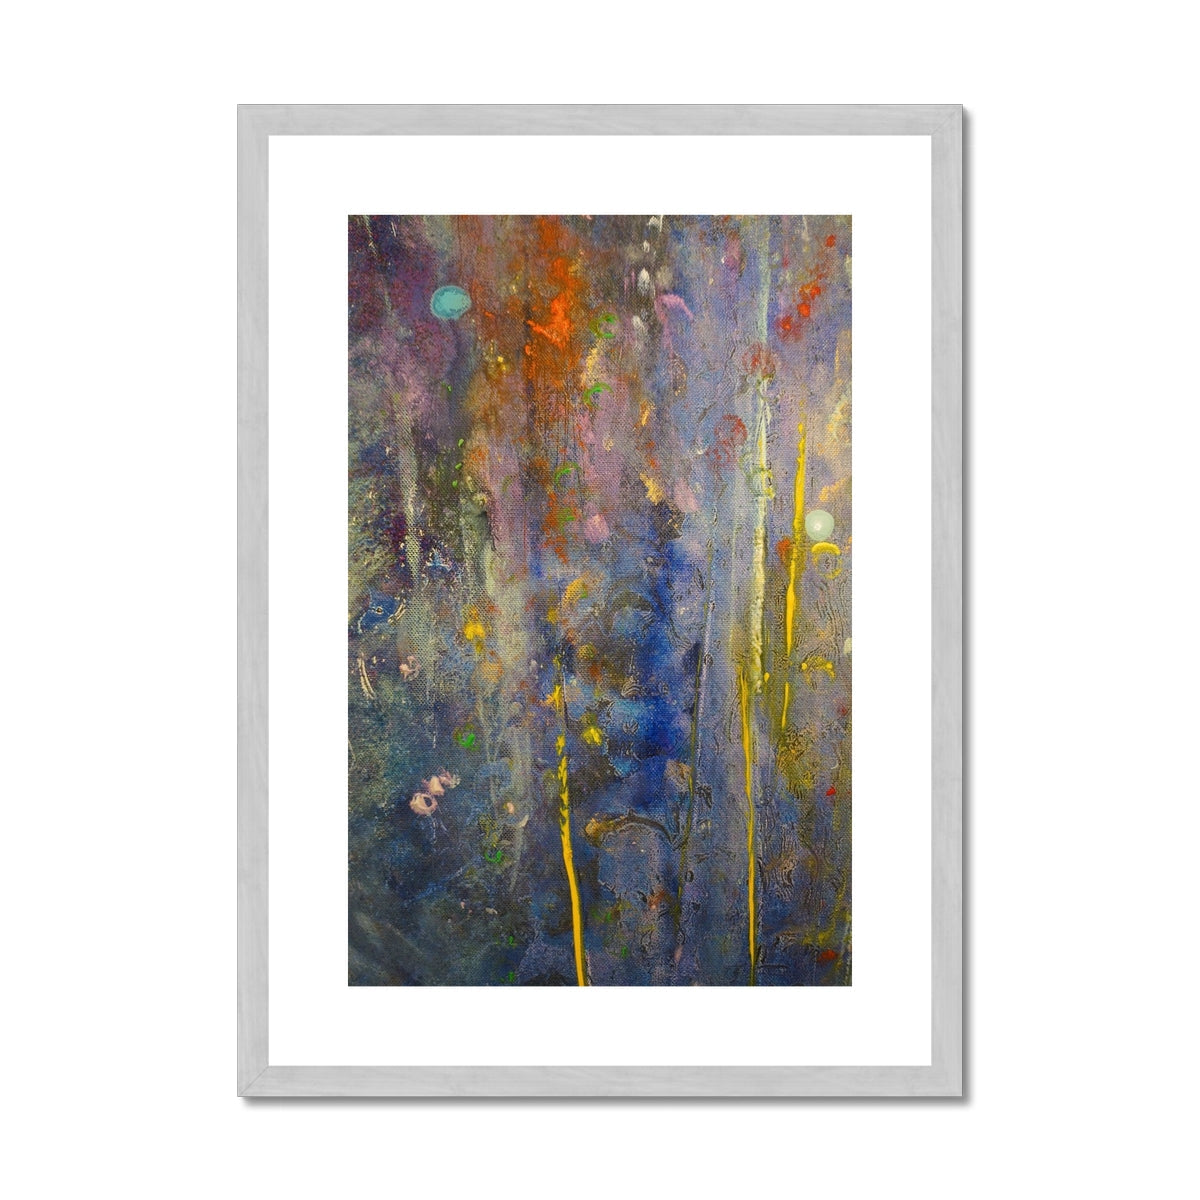 Cairngorms Waterfall Abstract Painting | Antique Framed & Mounted Prints From Scotland-Antique Framed & Mounted Prints-Abstract & Impressionistic Art Gallery-A2 Portrait-Silver Frame-Paintings, Prints, Homeware, Art Gifts From Scotland By Scottish Artist Kevin Hunter